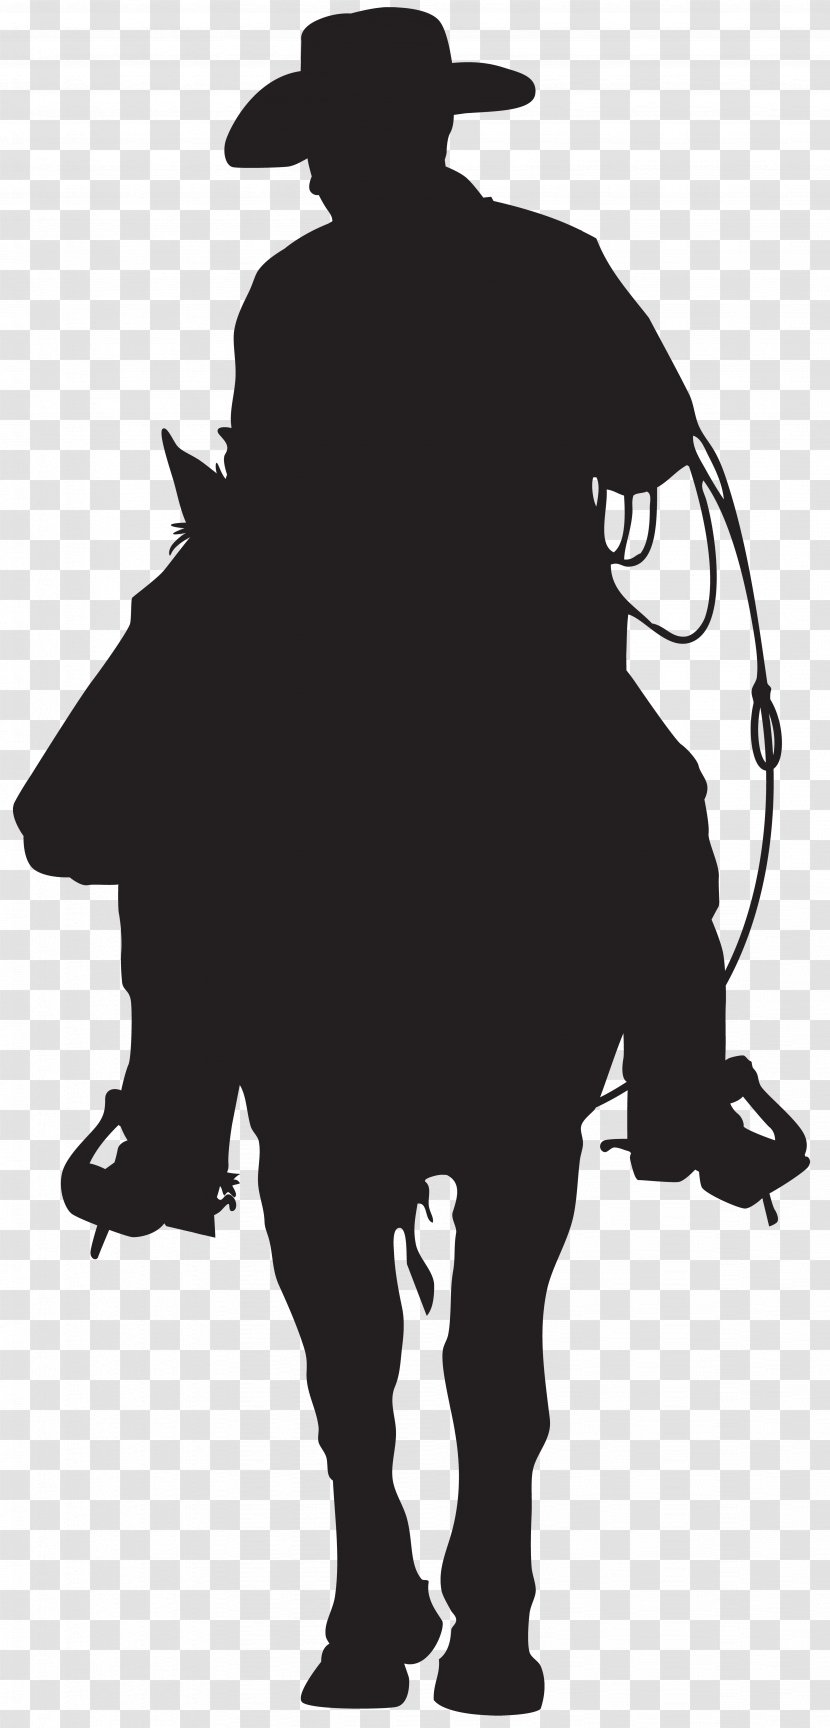 Silhouette Cowboy American Frontier Clip Art - Cattle Like Mammal - Image Transparent PNG